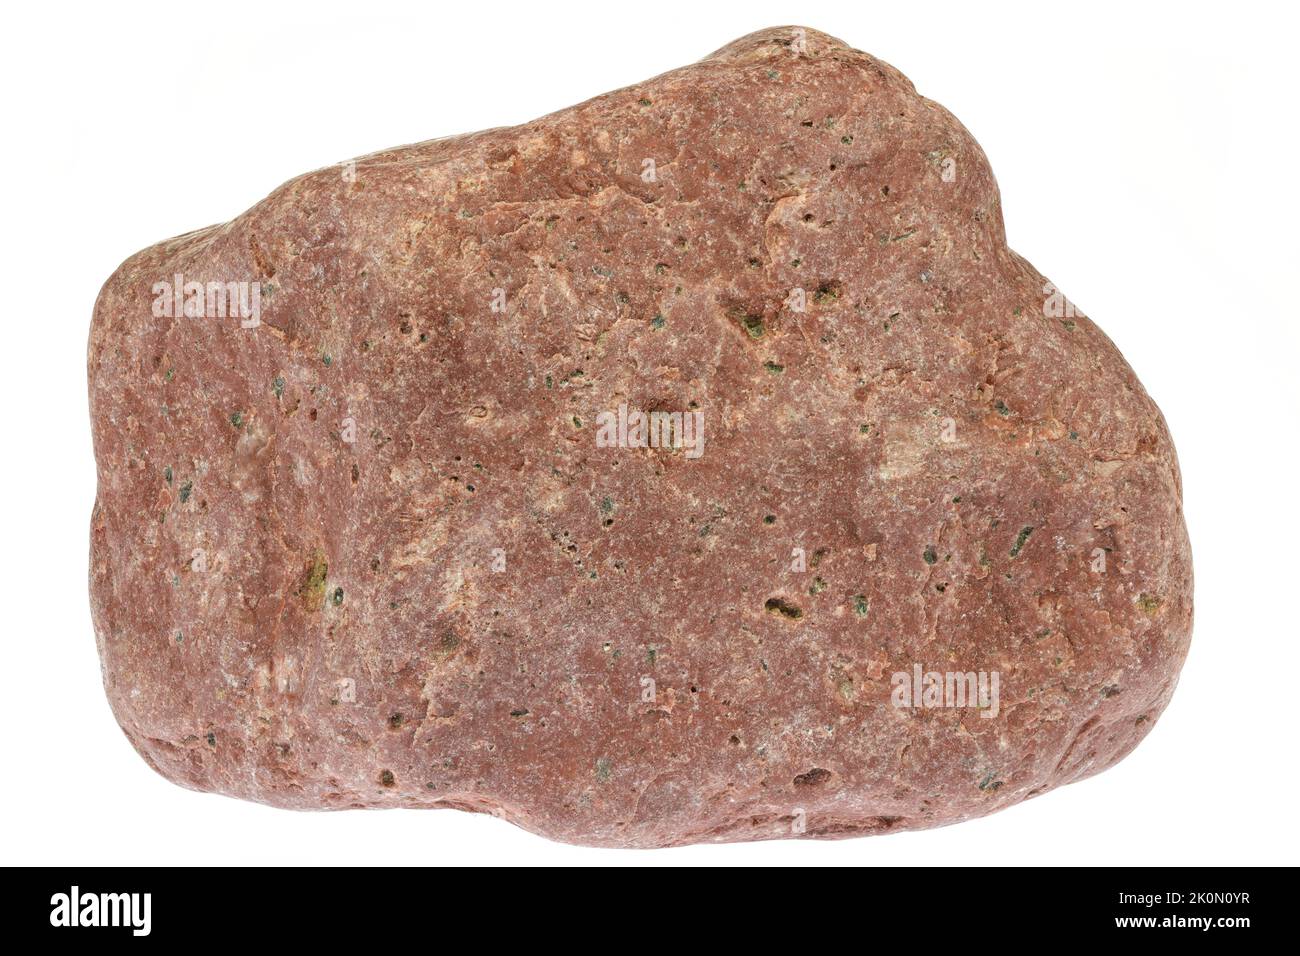 rhyolite from the Baltic Sea coast in Waabs, Germany isolated on white background Stock Photo